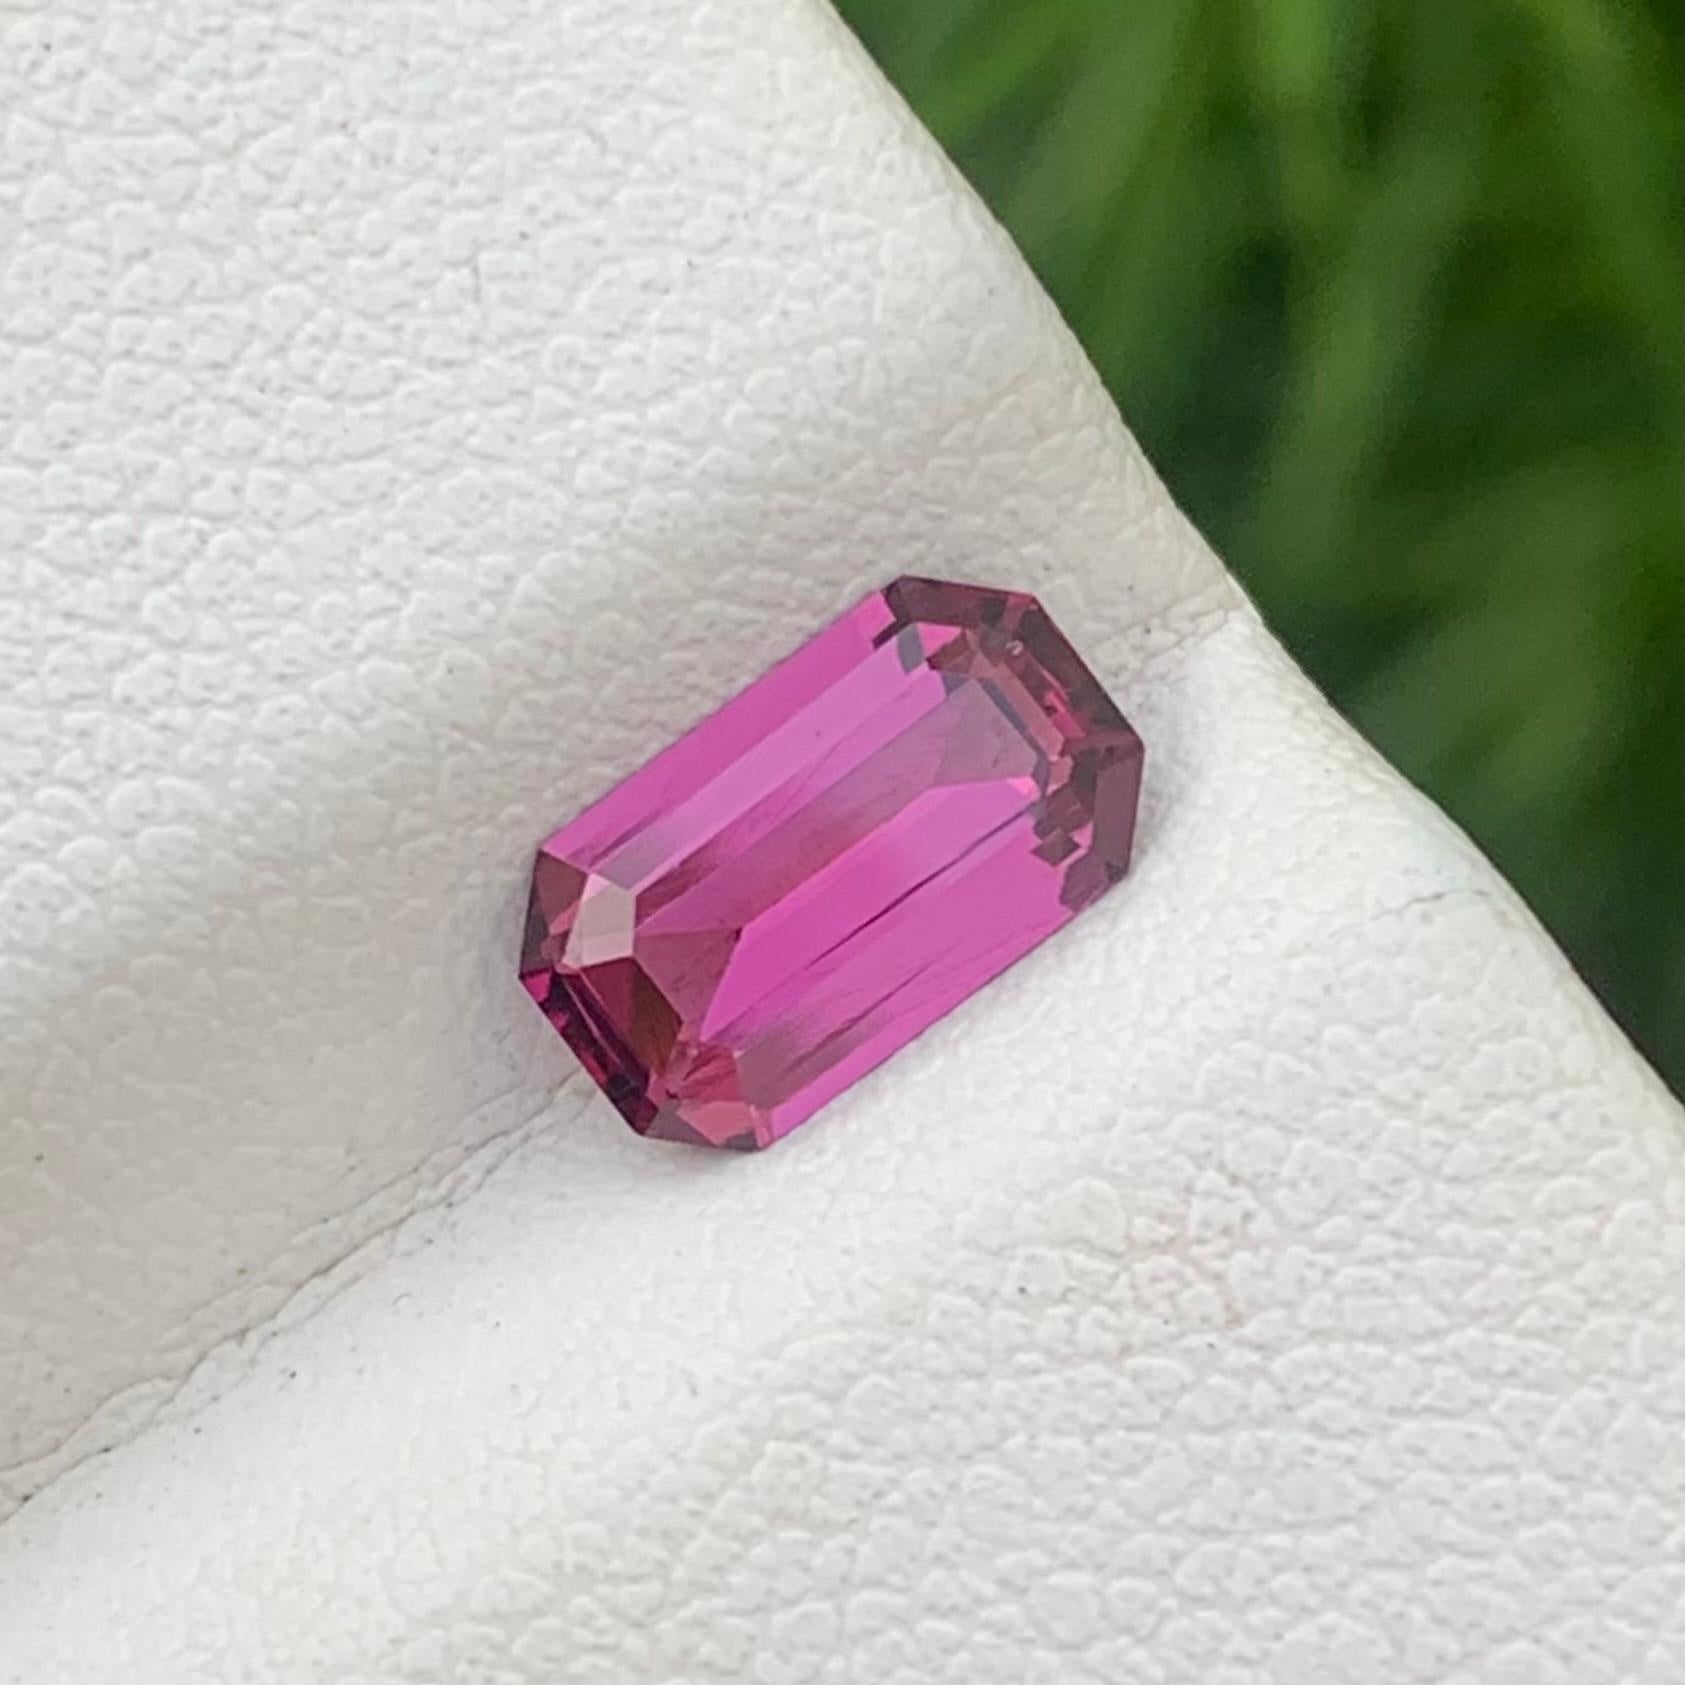 Loose Rhodolite 
Weight: 1.20 Carats 
Dimension: 8.3x4.8x2.3 mm
Origin: Tanzania 
Shape: Emerald 
Color: Purplish Pink
Treatment: Non
Rhodolite garnet is a captivating gemstone renowned for its enchanting purplish-red to pinkish-red color. This